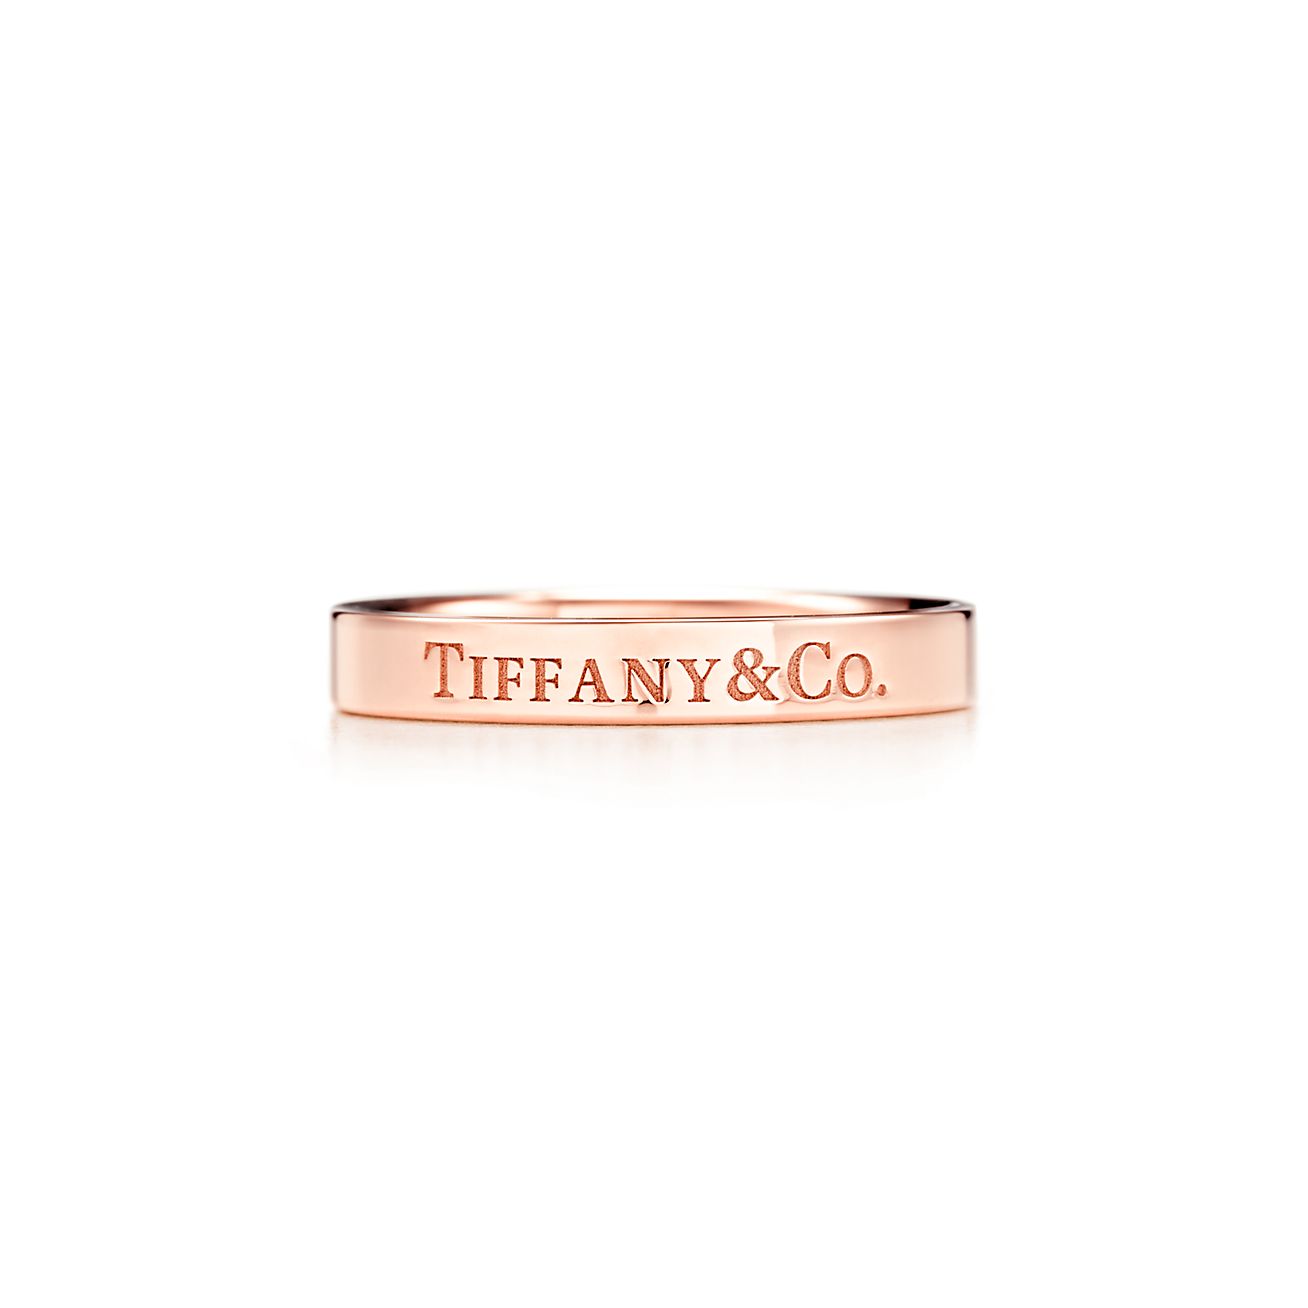 tiffany & co rose gold ring